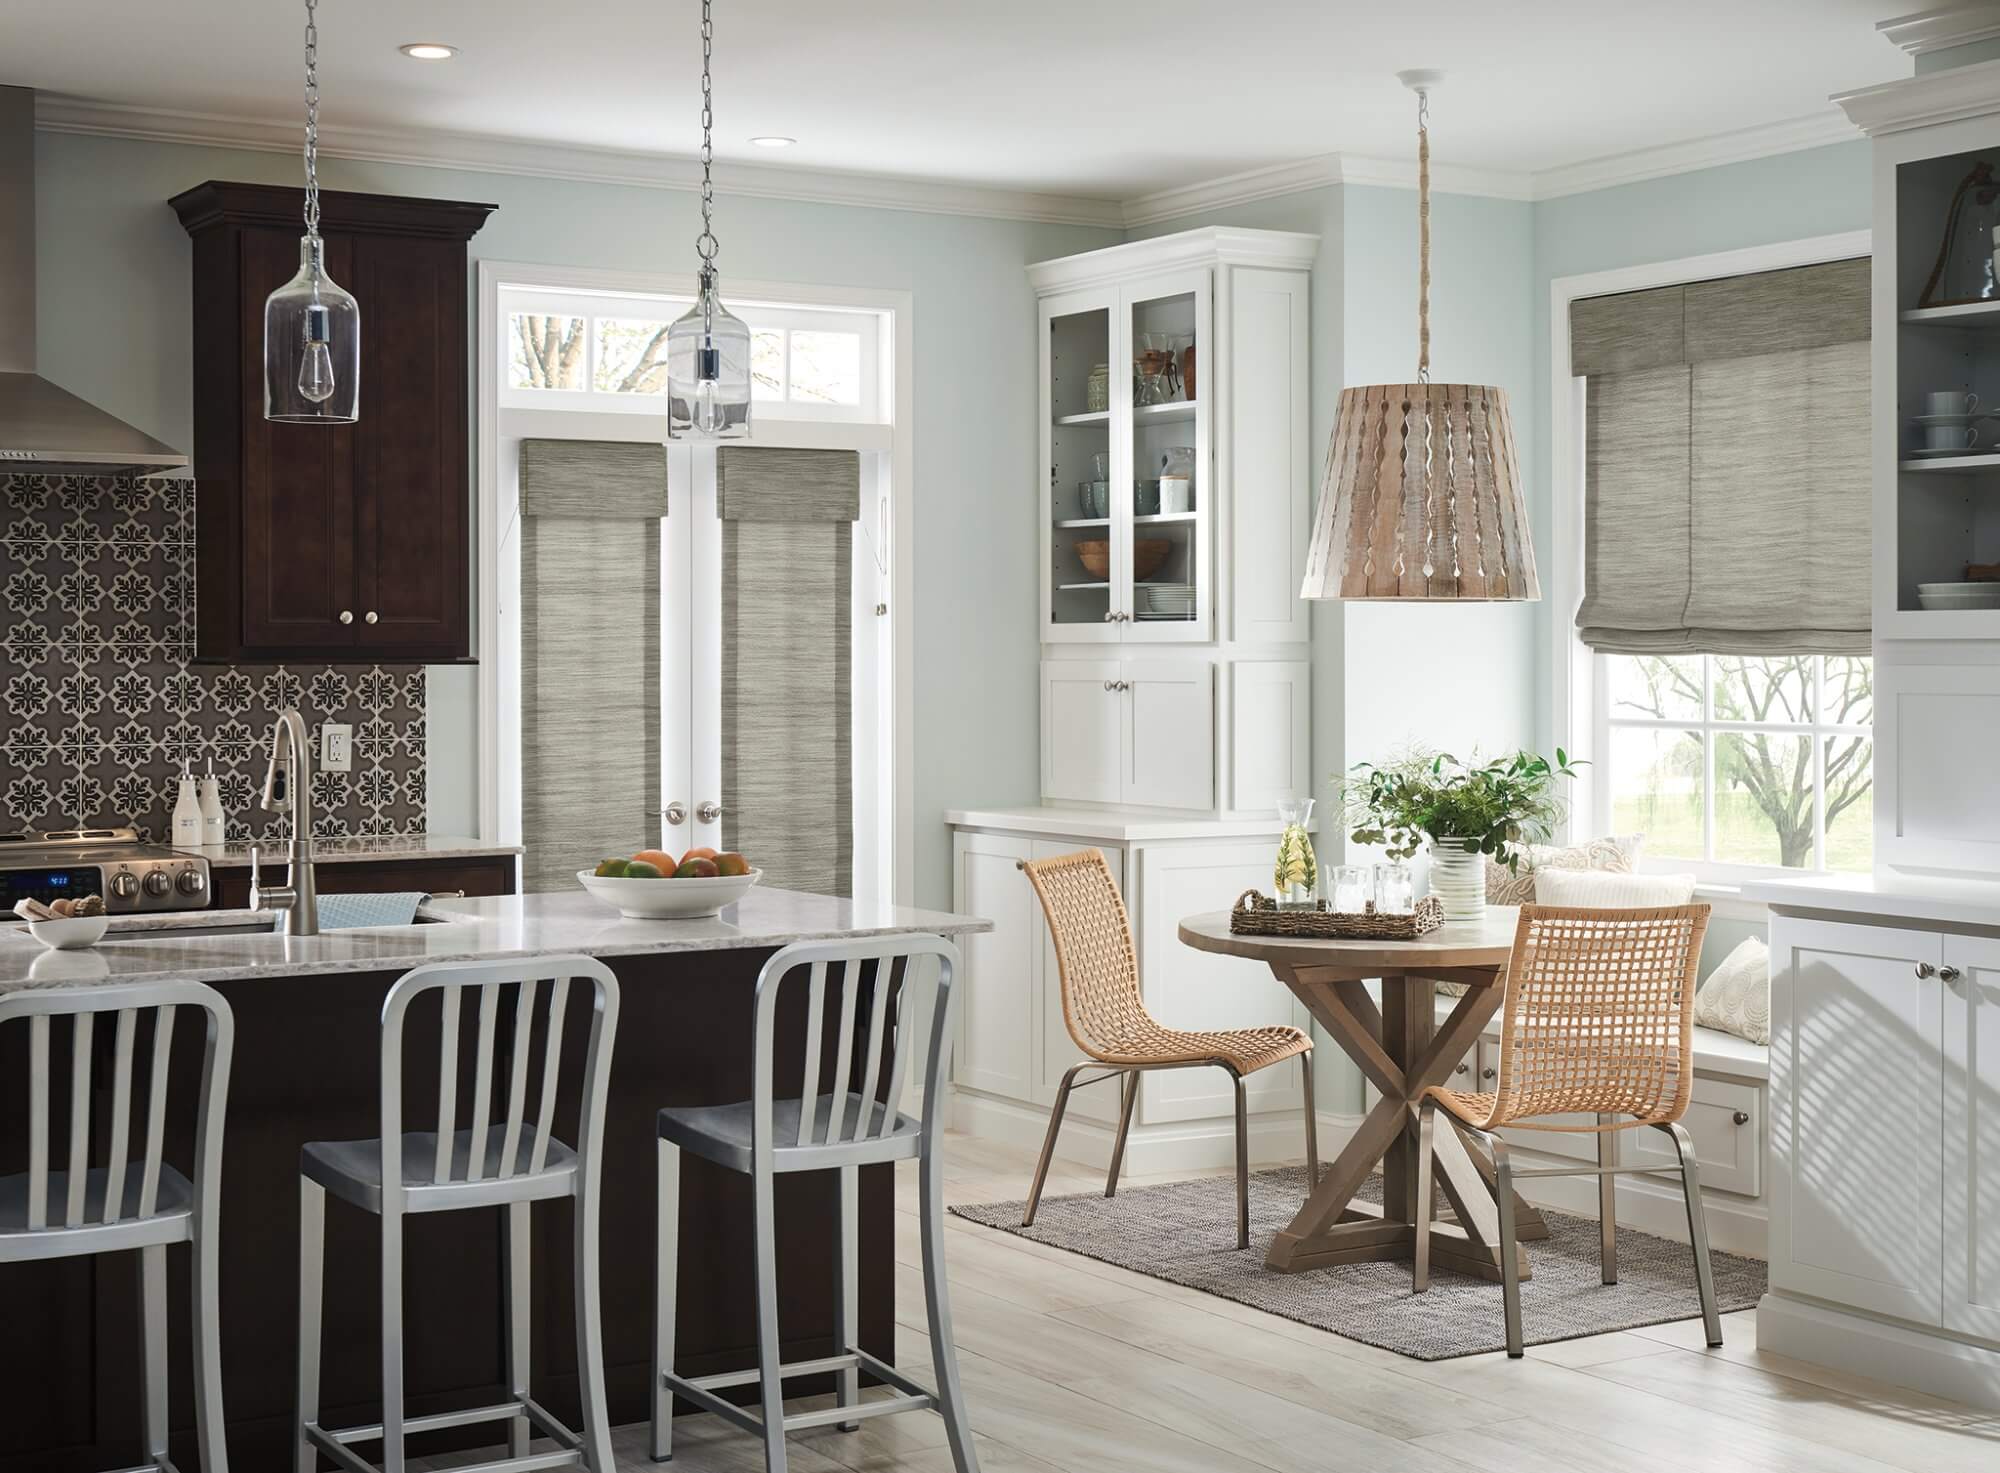 Light filtering window treatments offer a perfect balance of beauty and functionality to any kitchen.